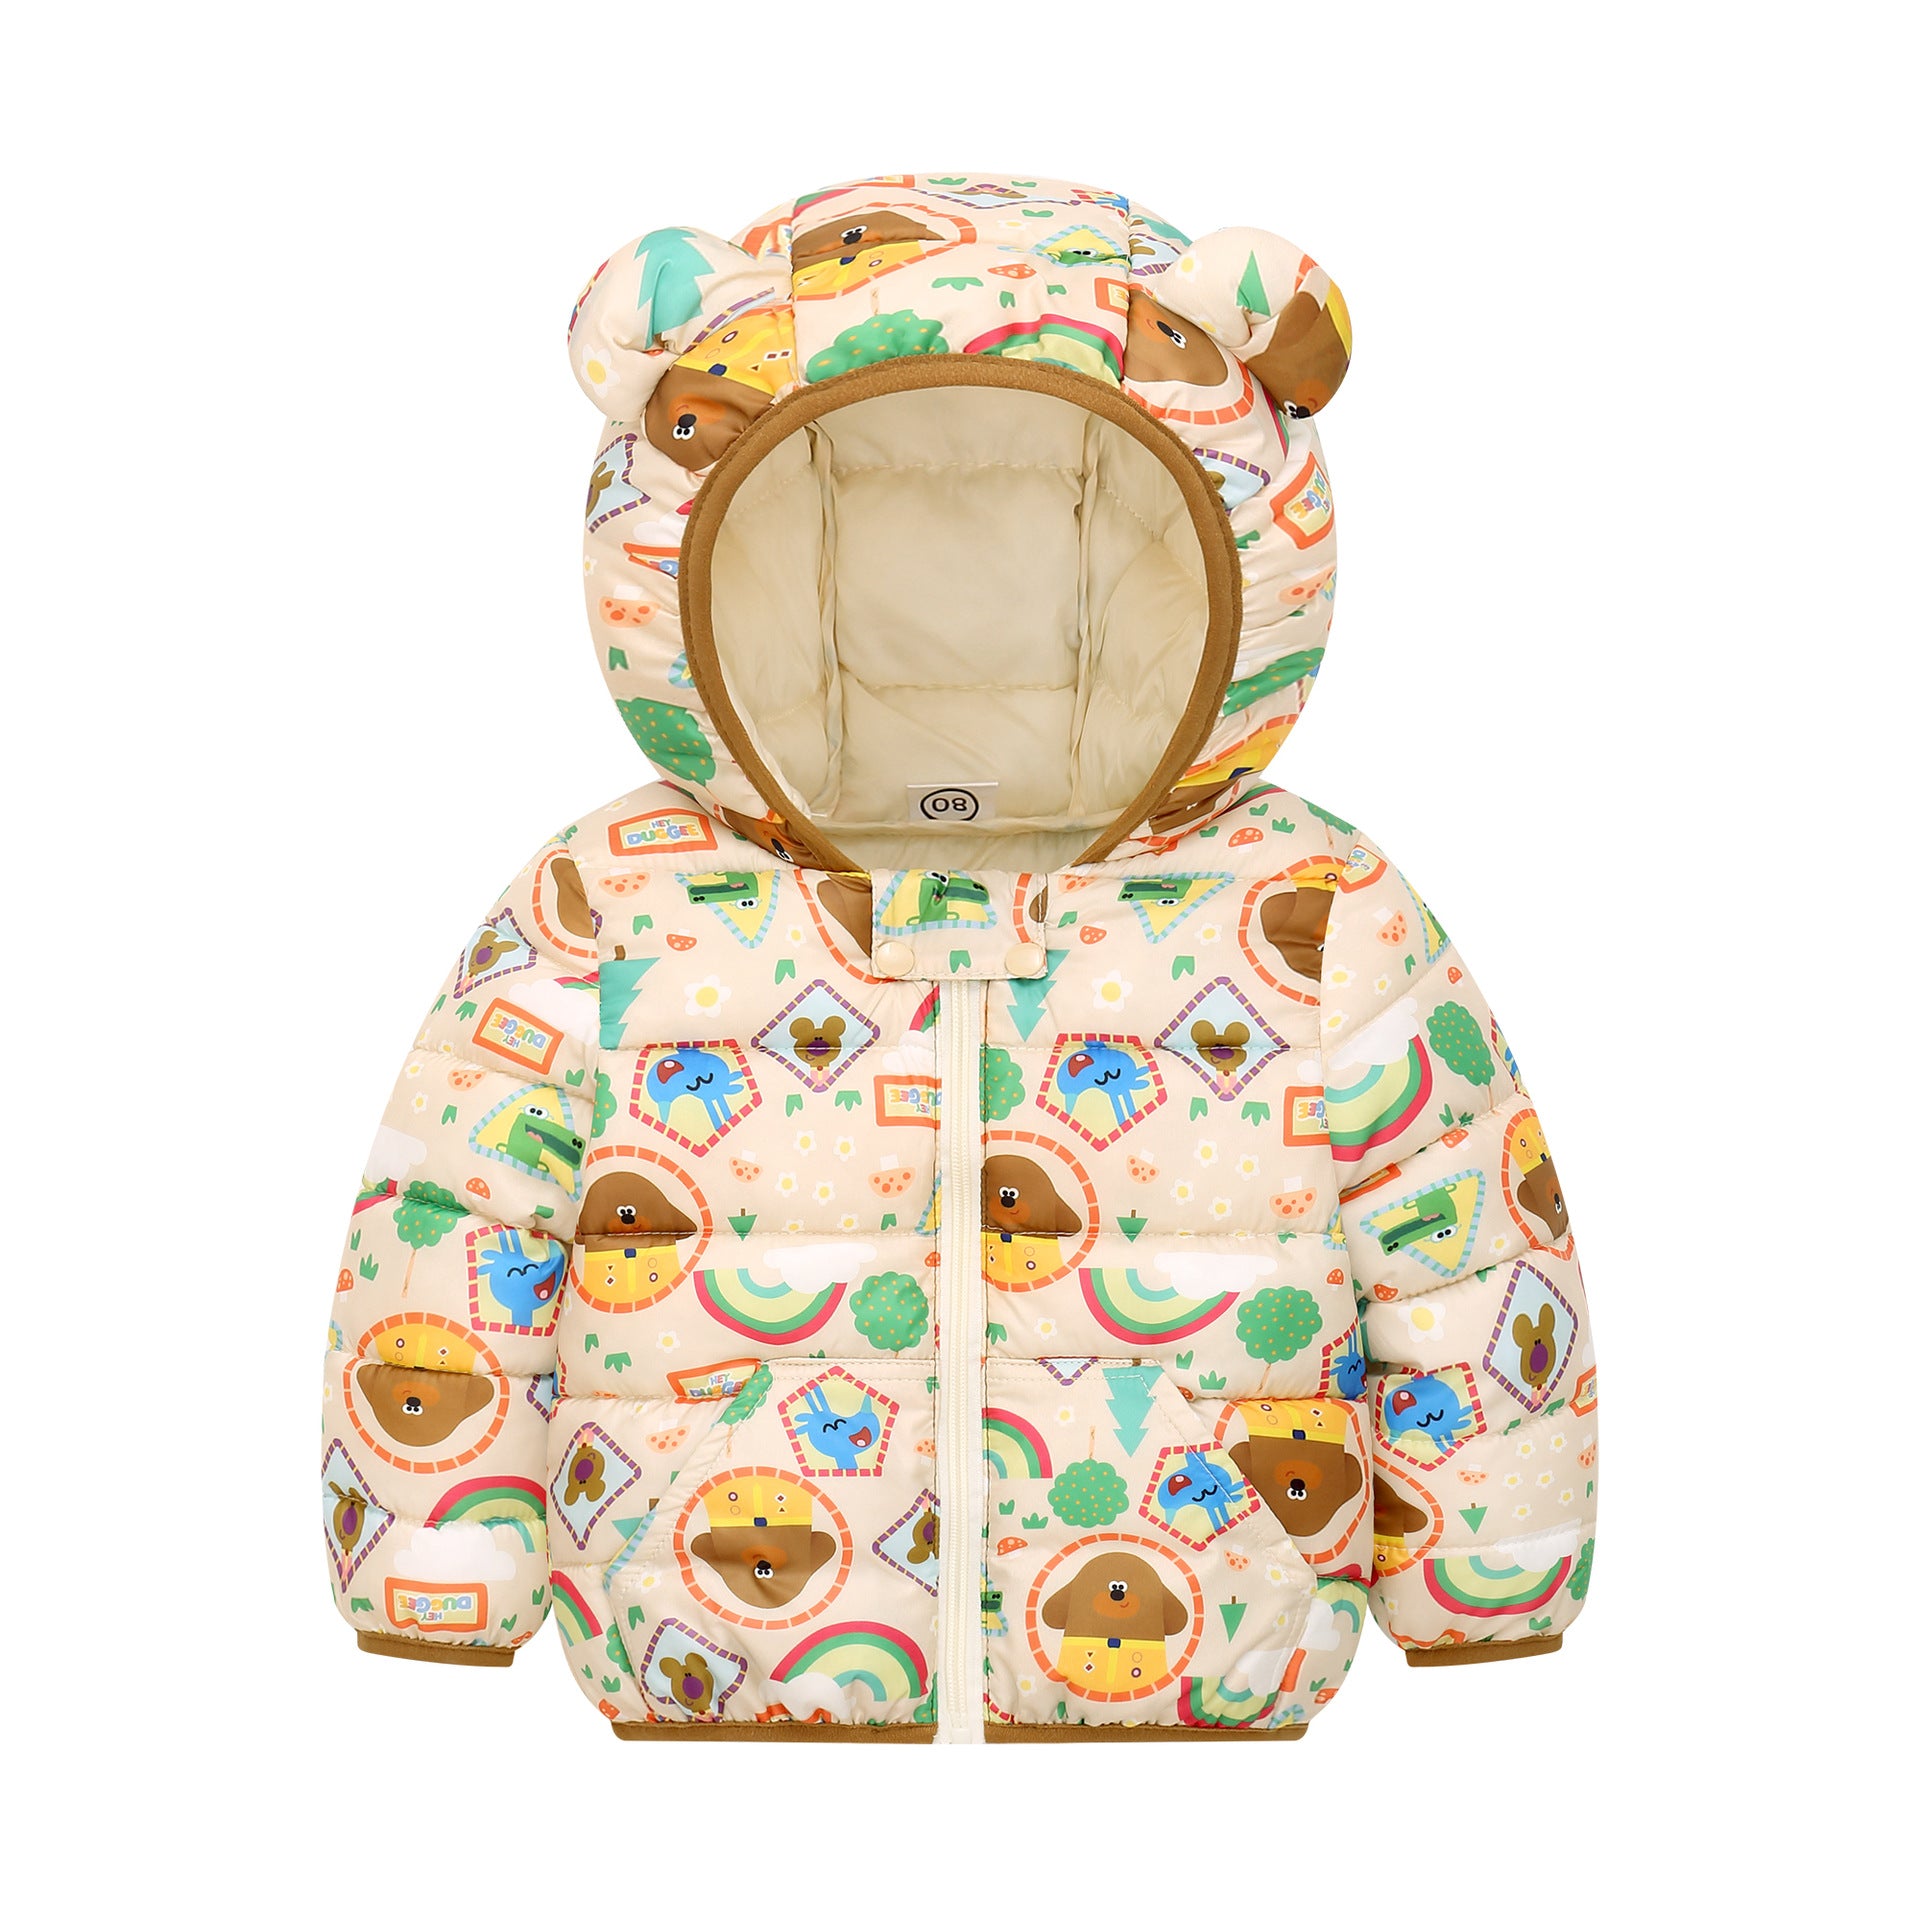 Small And Medium-sized Children's Down Padded Winter Boys And Girls Printed Cotton Coat